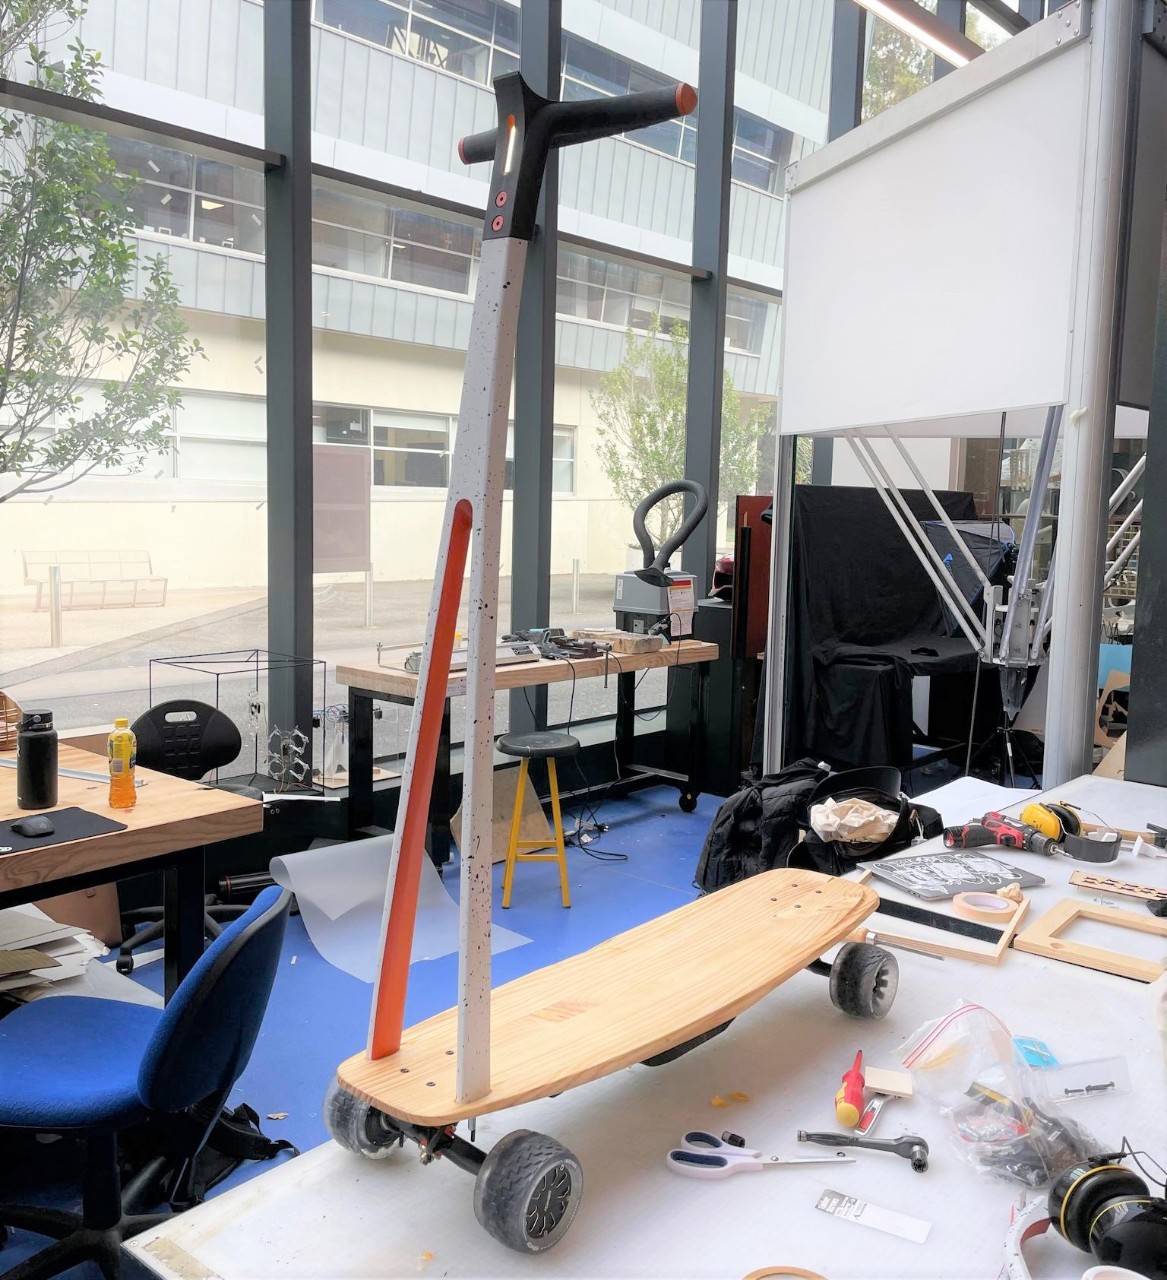 The prototype of the ark-e micro mobility design sits on a working desk in the protolab, it looks similar to a scooter but with a base and wheels like a cruiser skateboard